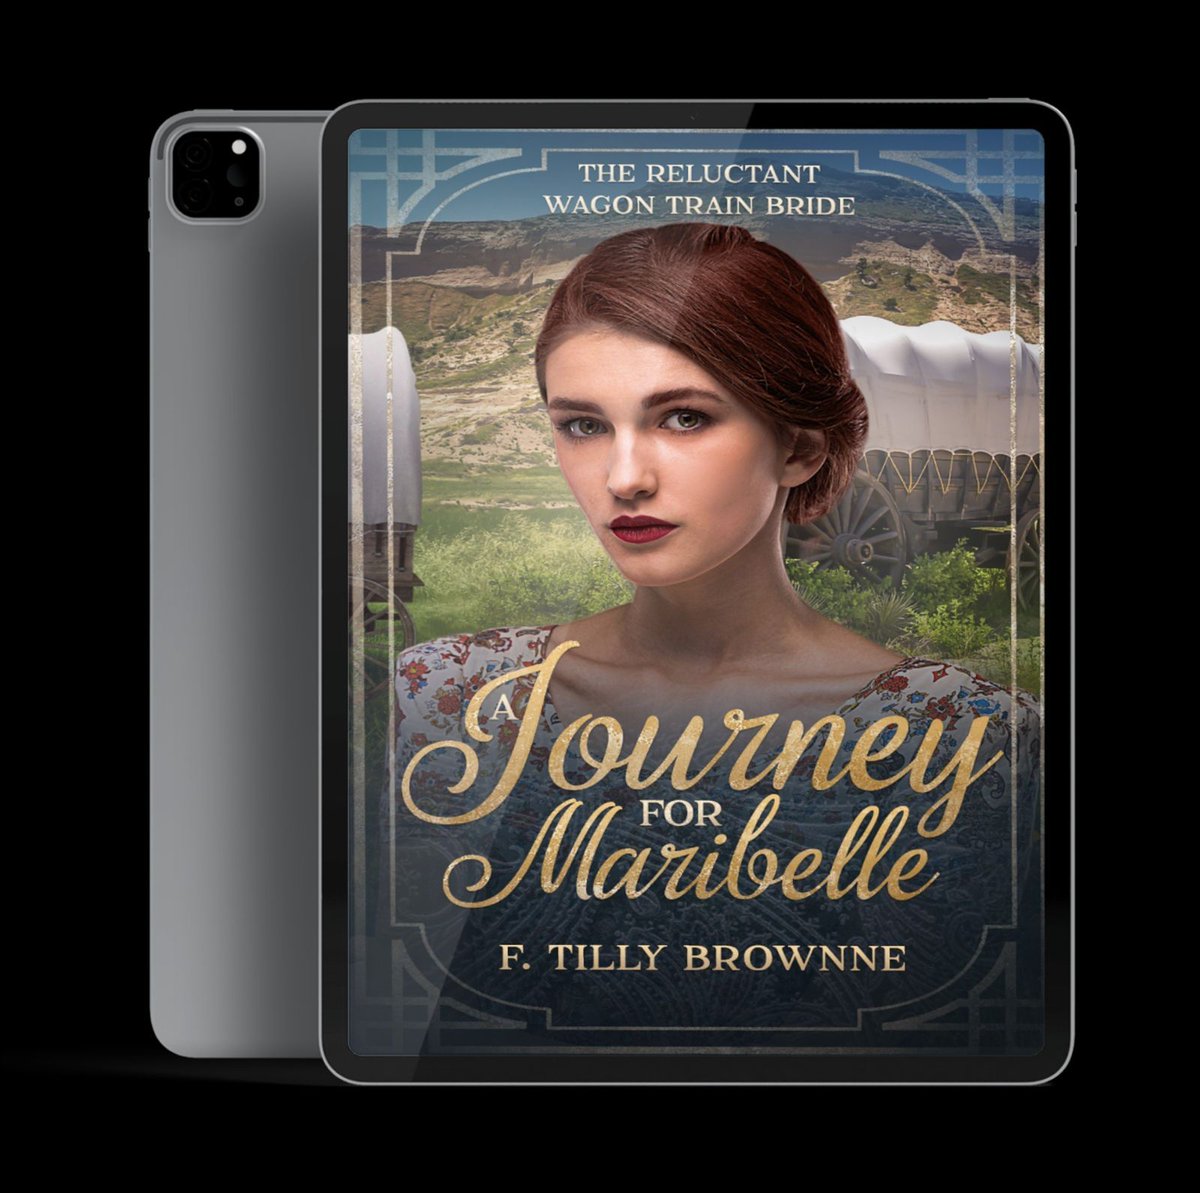 #KU Annabelle found her way. Now her sister, Maribelle, is back and trying to find her. She's desperate to join the #WagonTrain. Maribelle in The Reluctant Wagon Train Bride. NOW AVAILABLE! buff.ly/3rMbE8i #HistoricalRomance #IARTG